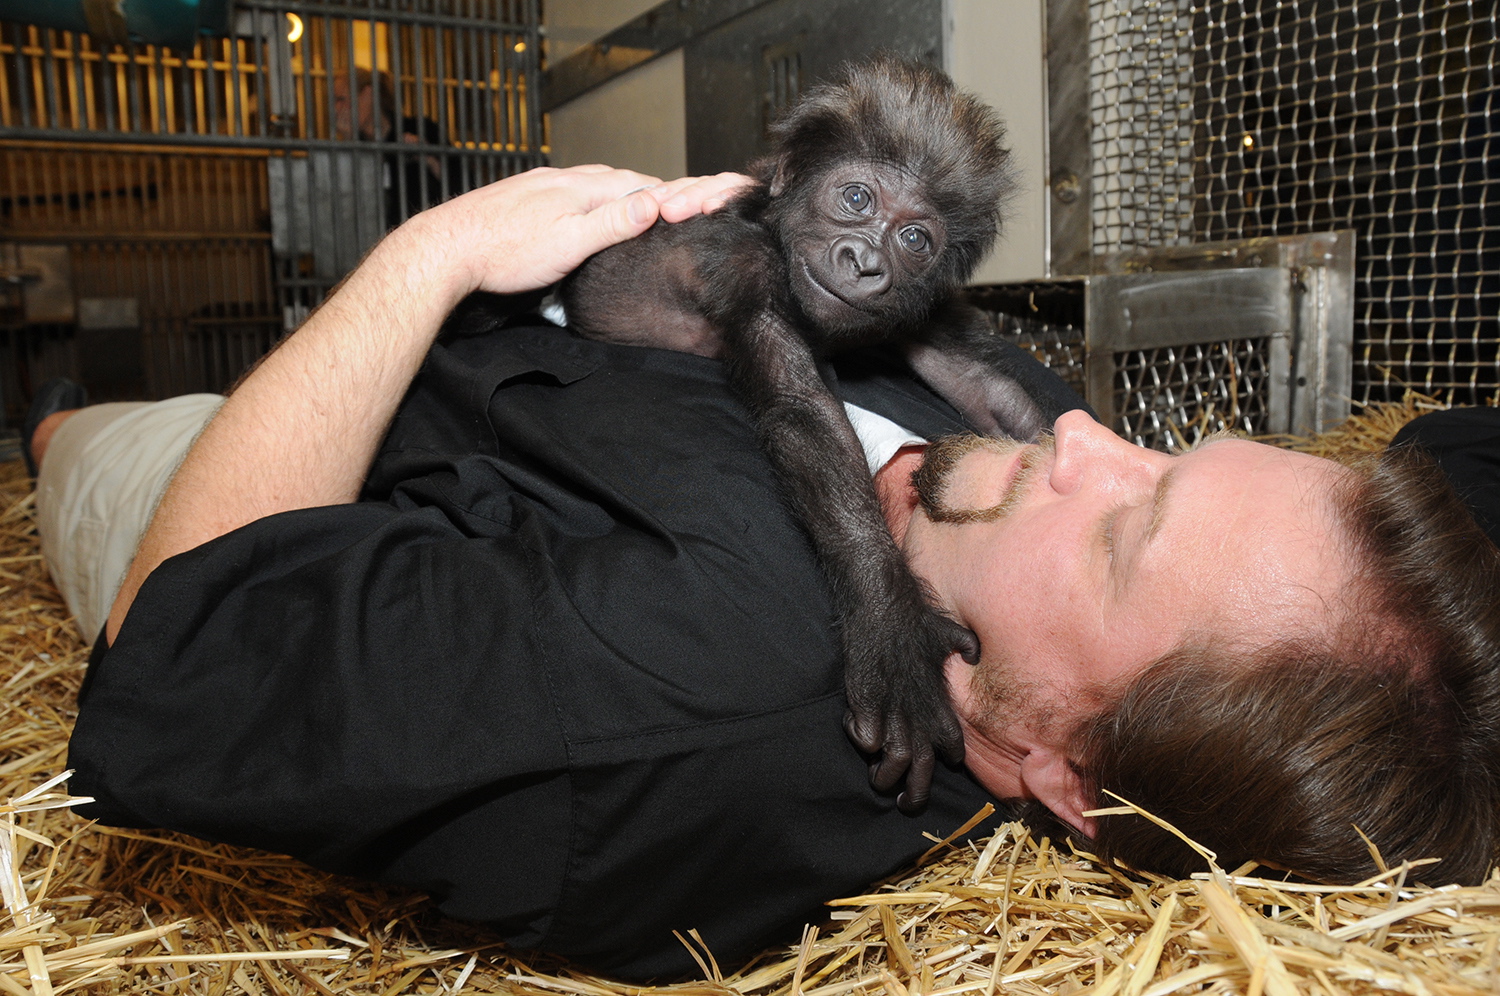 Ron Evans, Primate Center Team Leader at the zoo in Cincinnati, lays with a baby gorilla named Gladys the way a mother Western Lowland Gorilla would with her young.